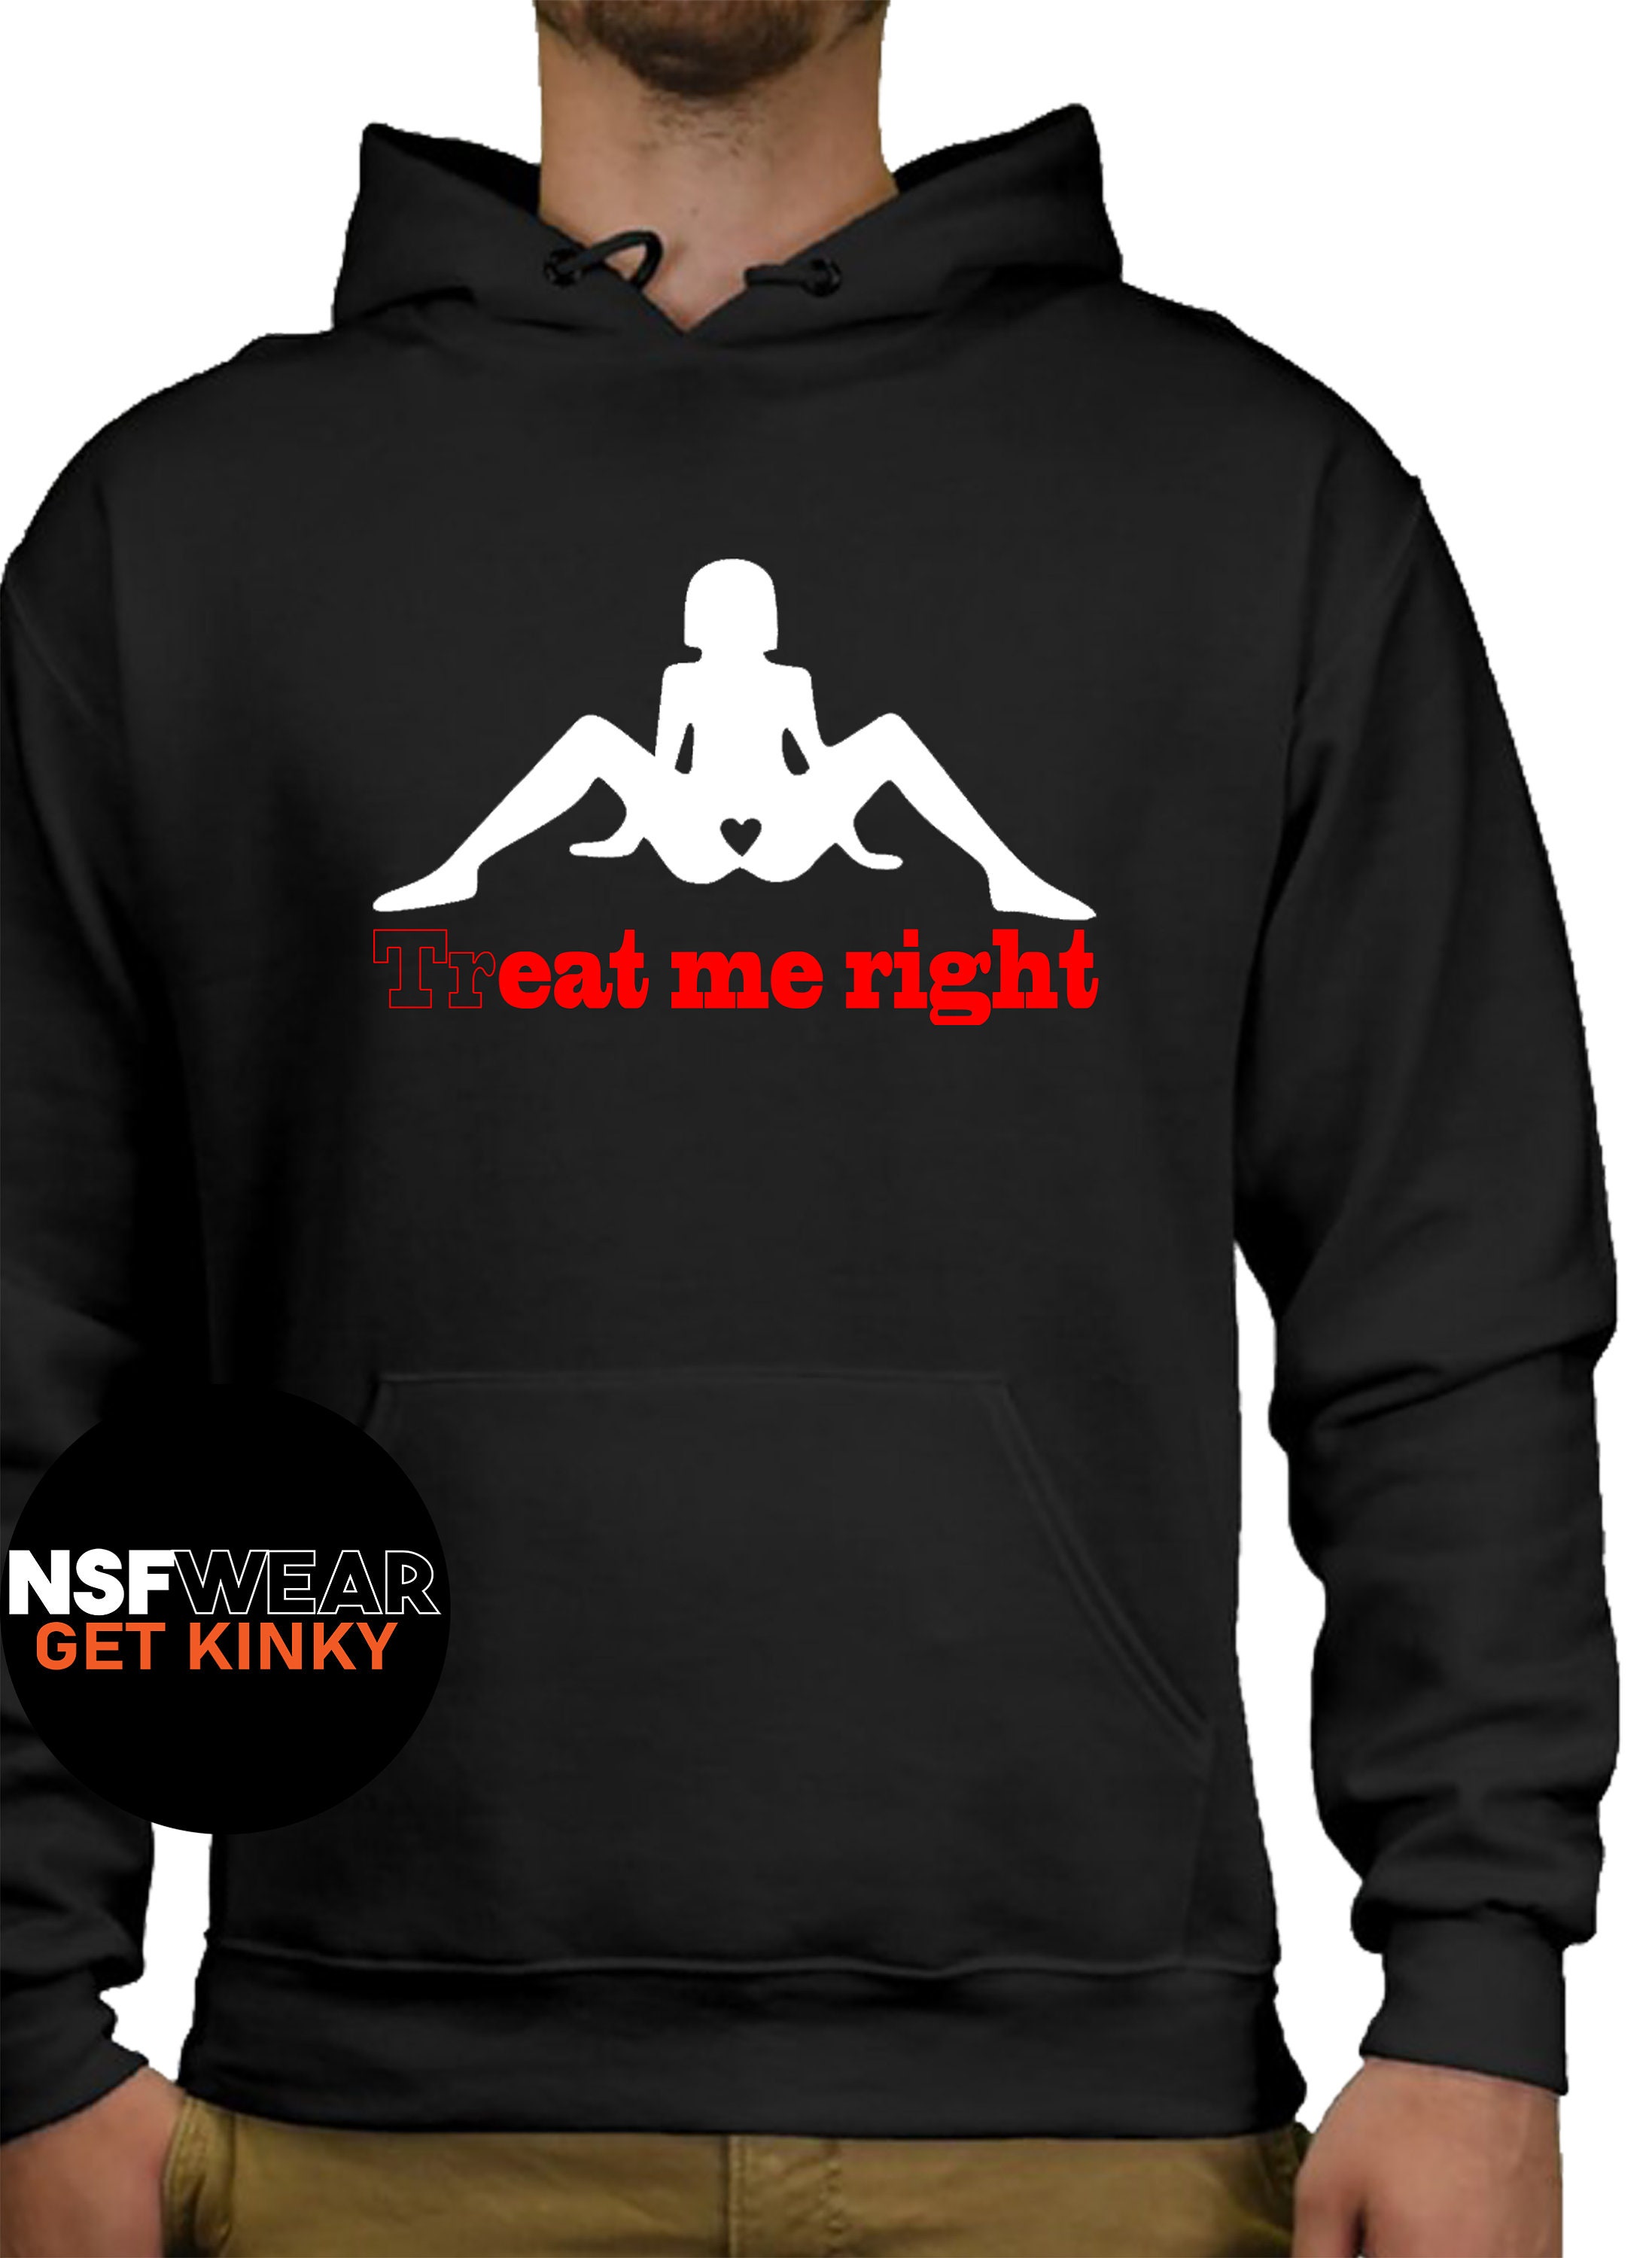 Treat Me Right Hoodie BDSM Femdom Submissive Kinky Fetish